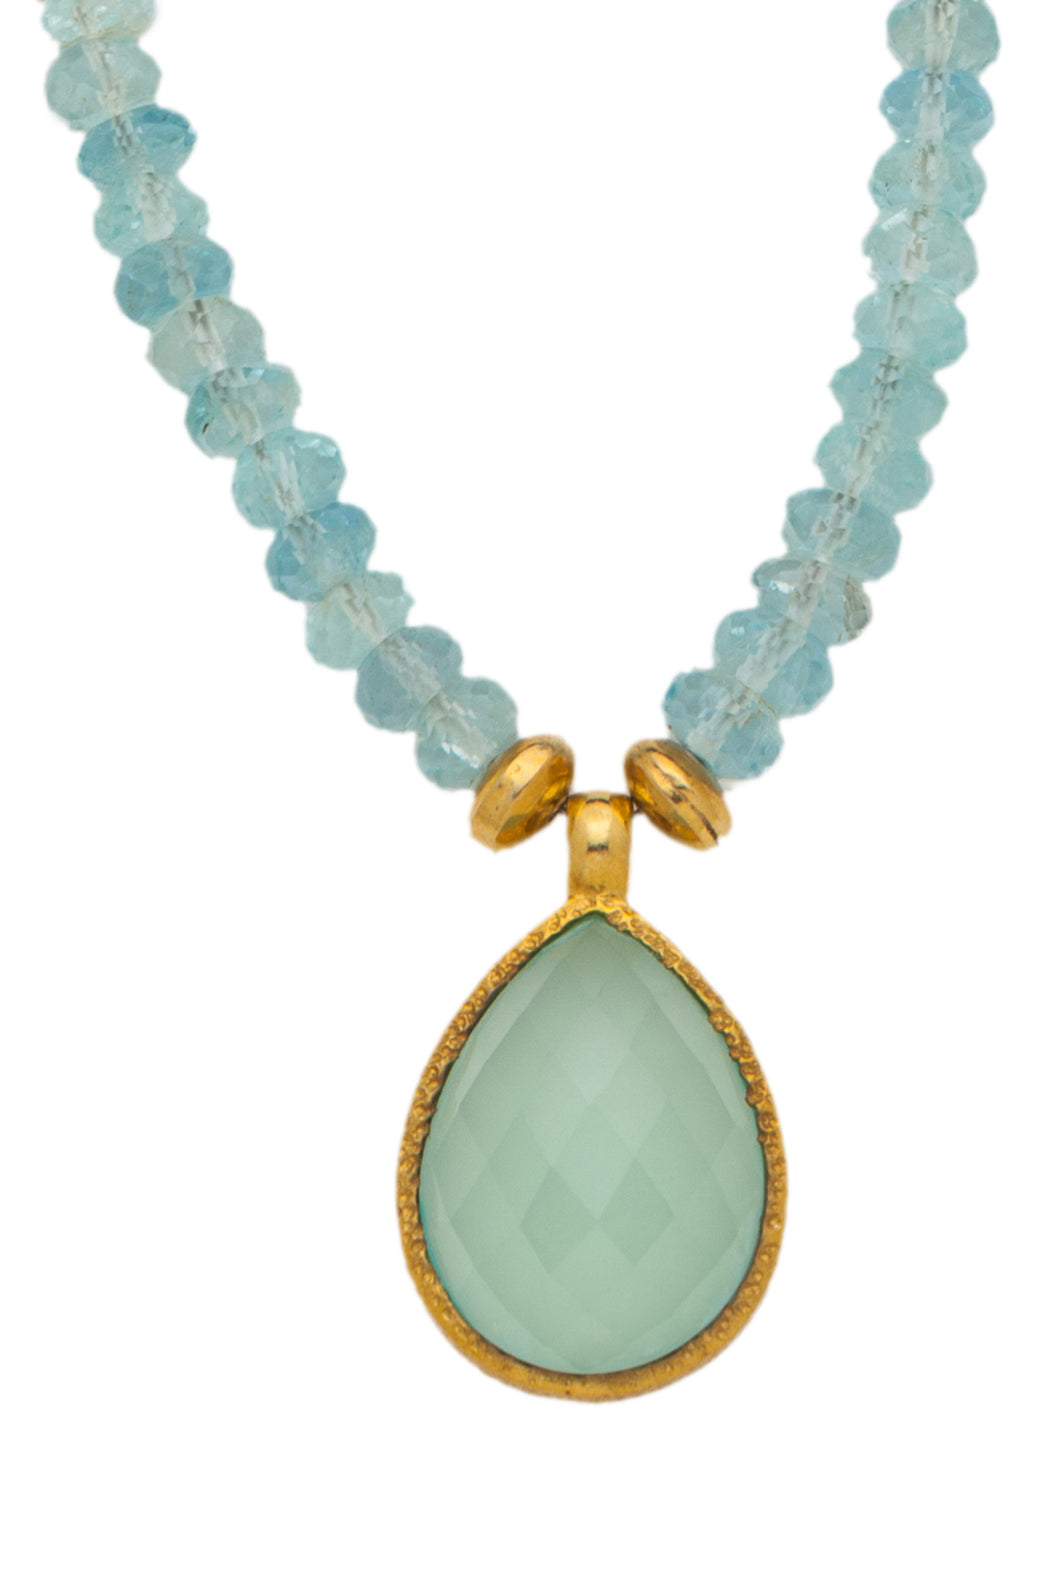 Aqua Marine faceted gemstone necklace with Chalcedony pendant in 24kt gold vermeil NF002-AM